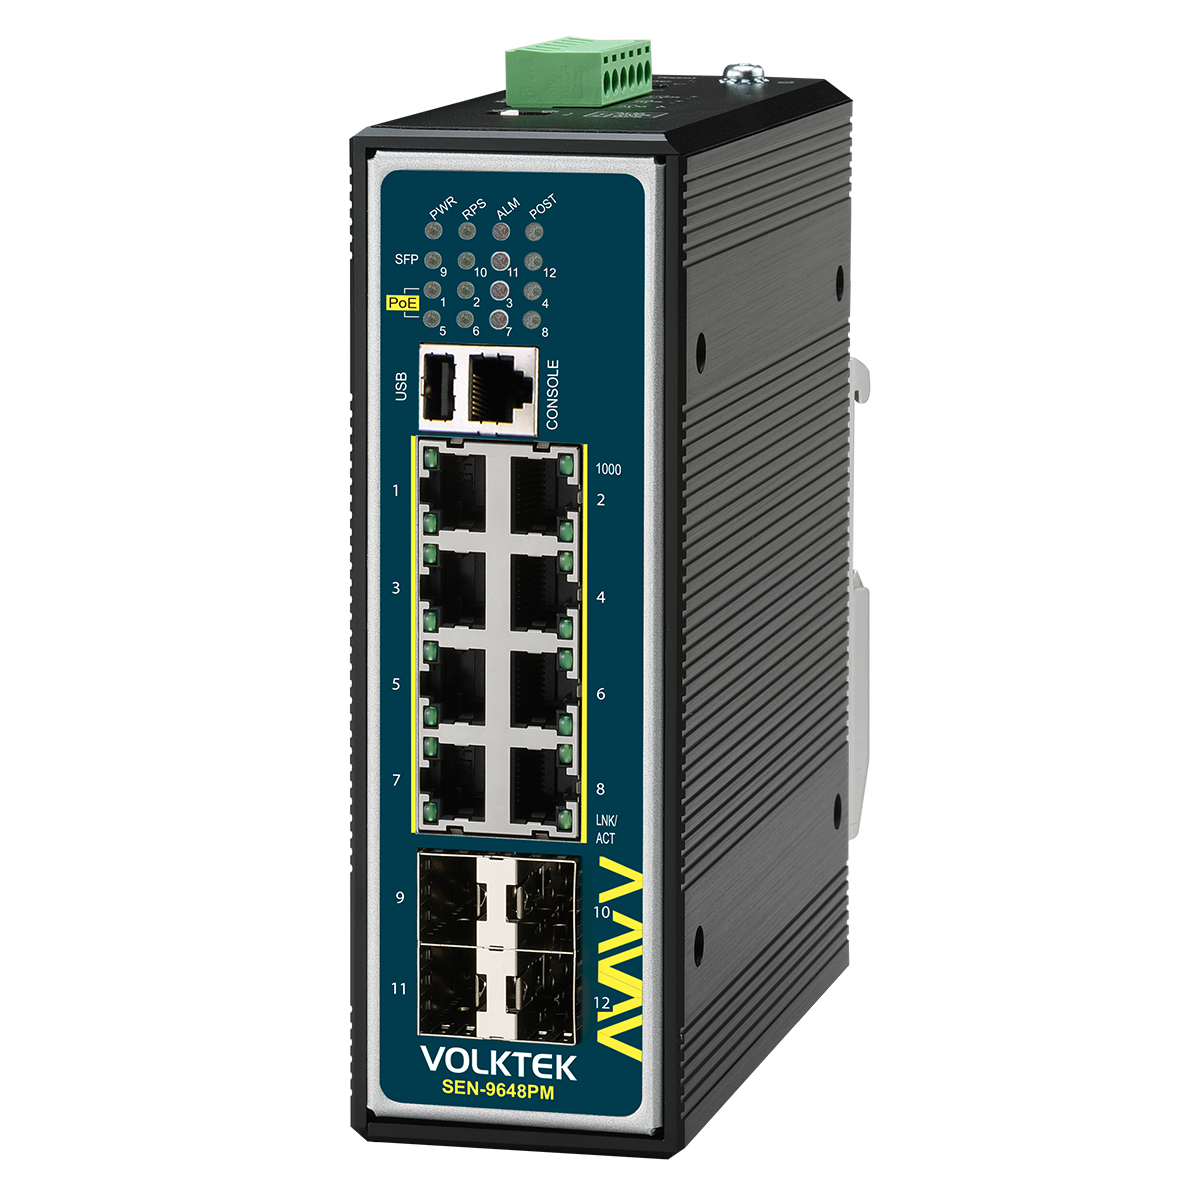 DNV Certified Switches